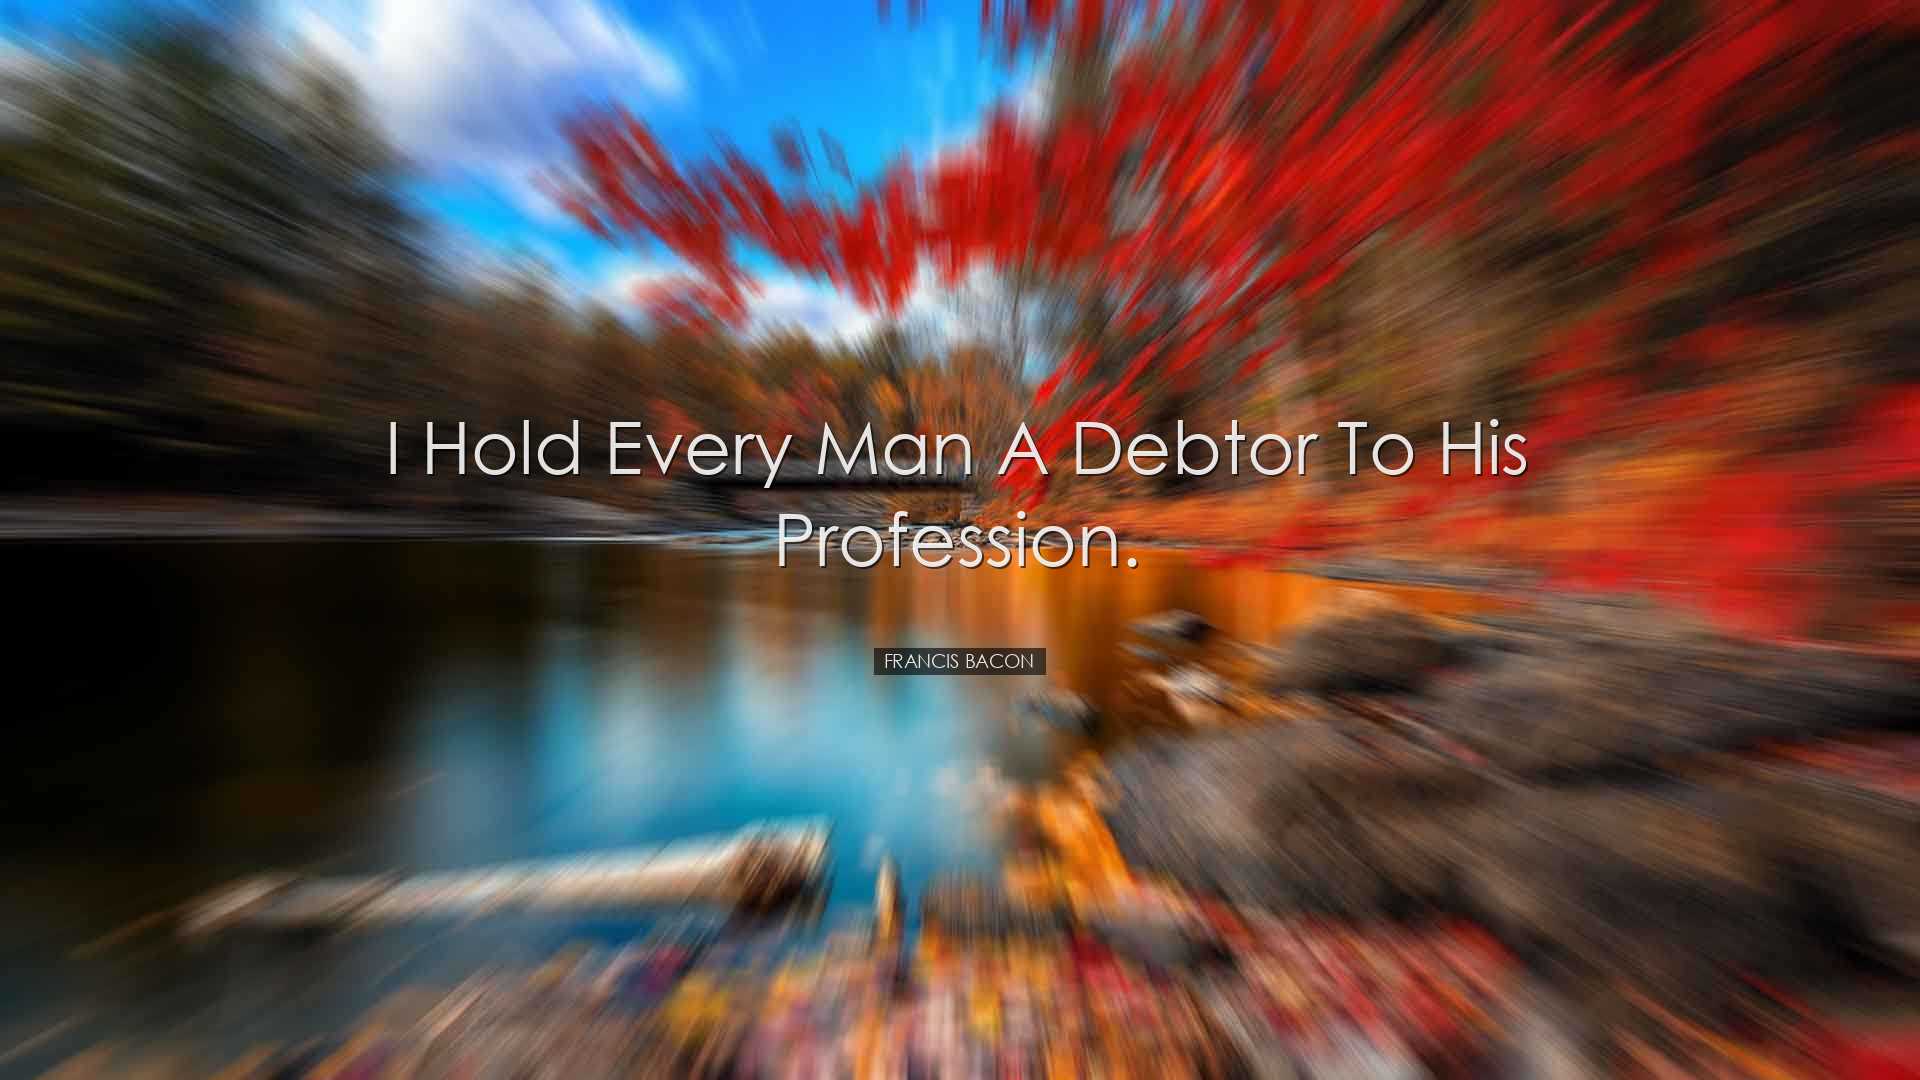 I hold every man a debtor to his profession. - Francis Bacon